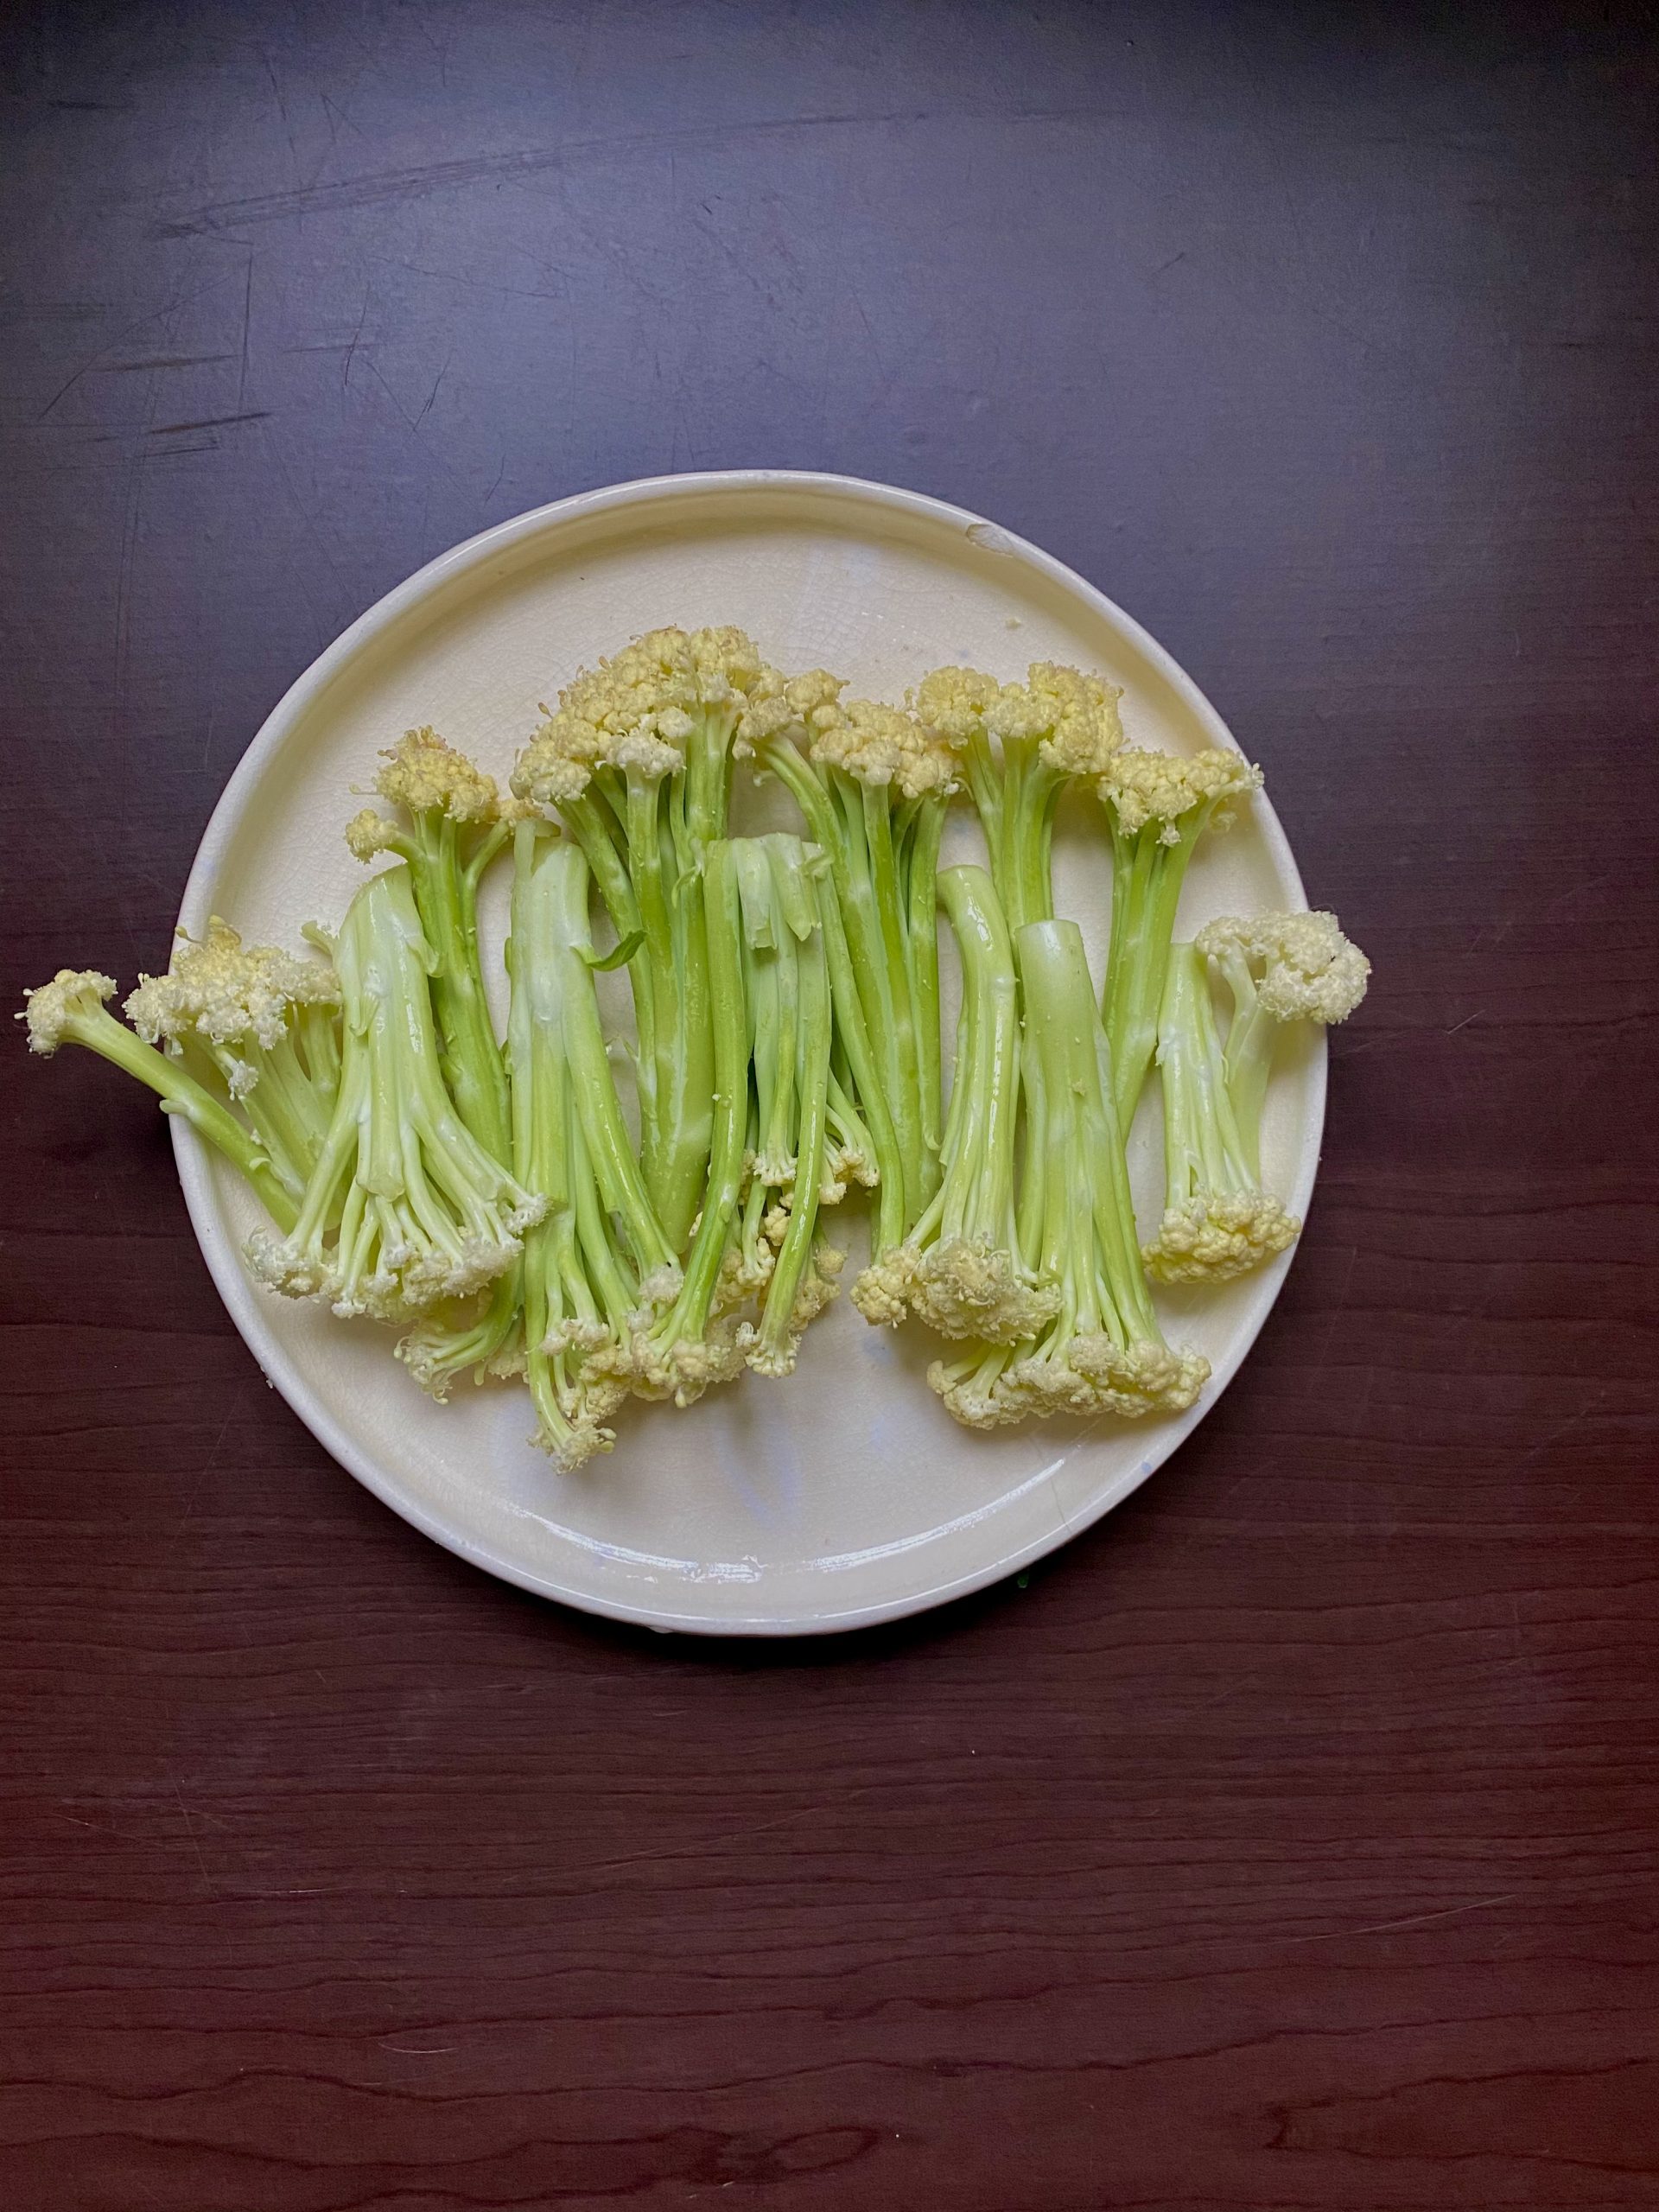 Flowering Cauliflower in the process of being plated to serve as an appetizer.